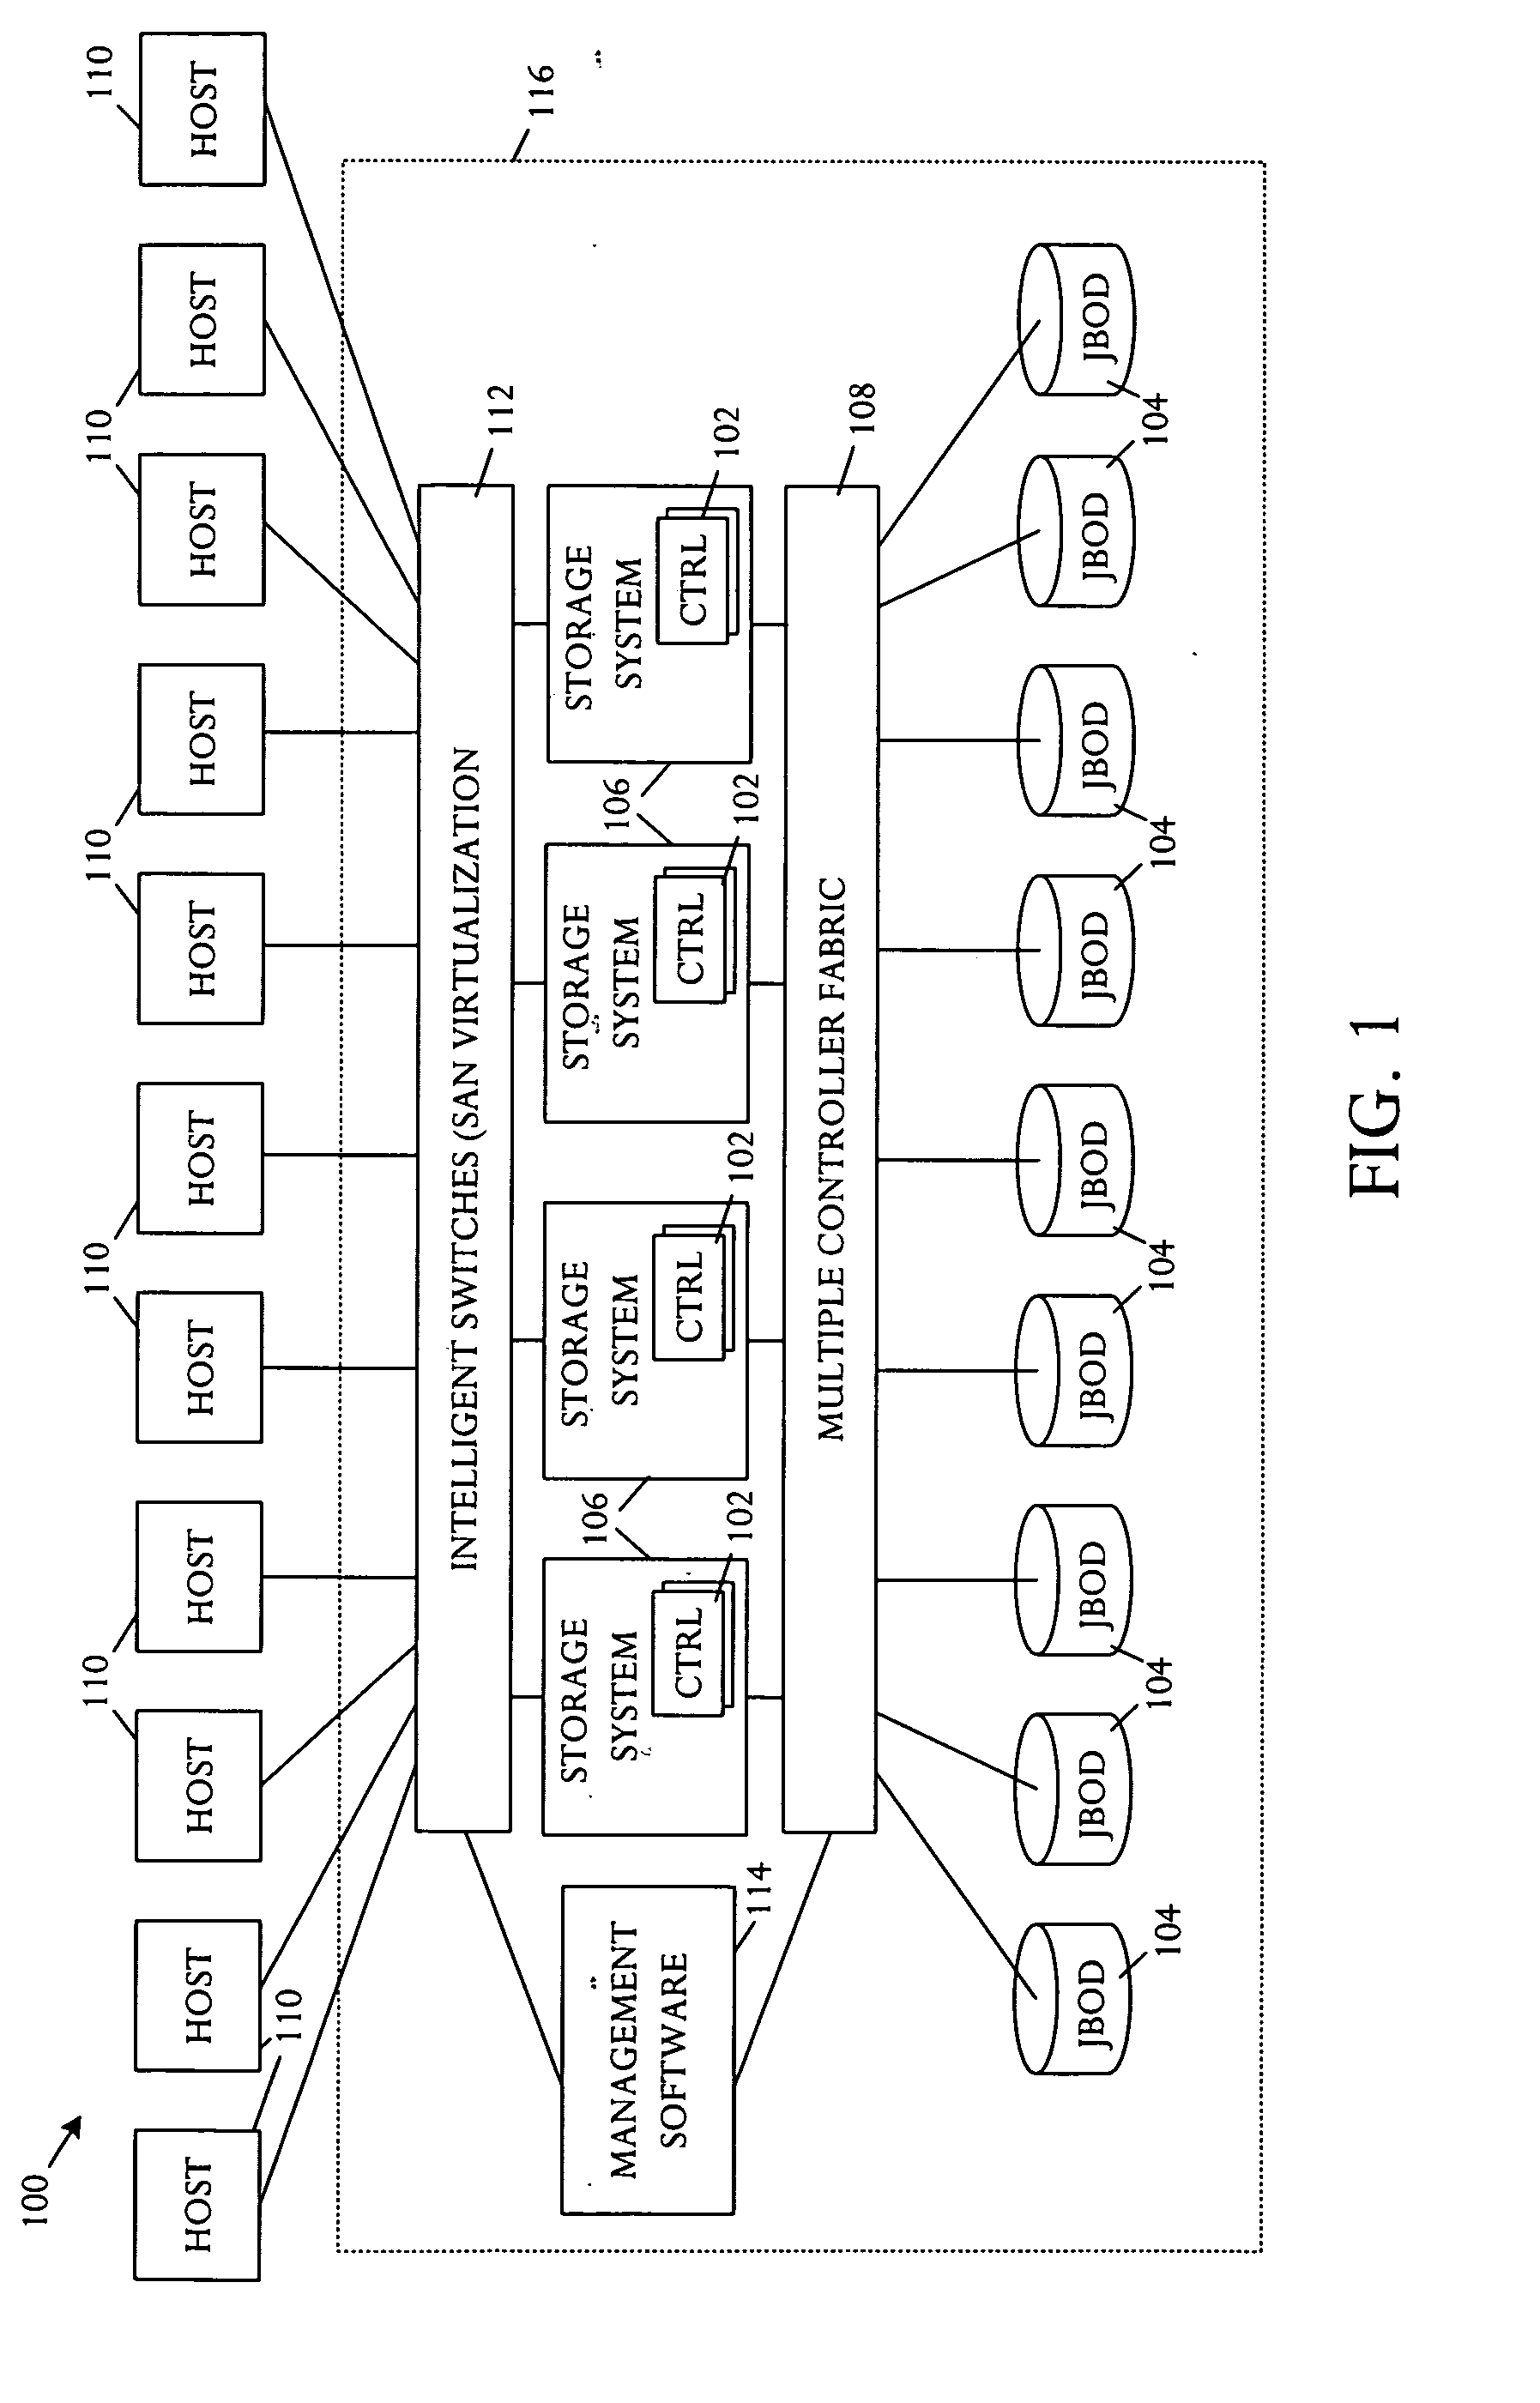 Storage system with capability to allocate virtual storage segments among a plurality of controllers